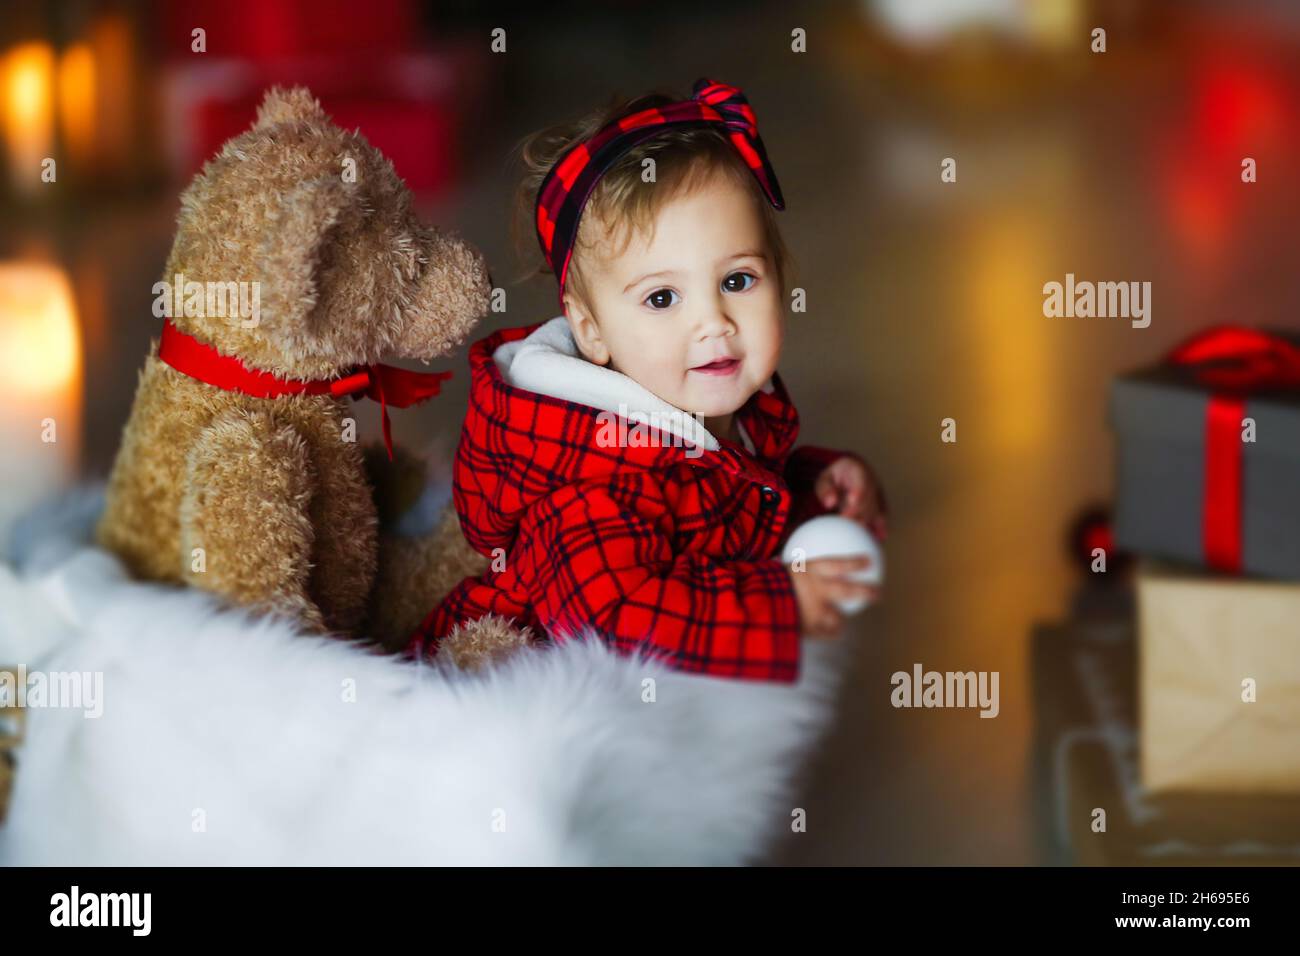 Christmas concept decoration with a child 3-4 years old. Stock Photo